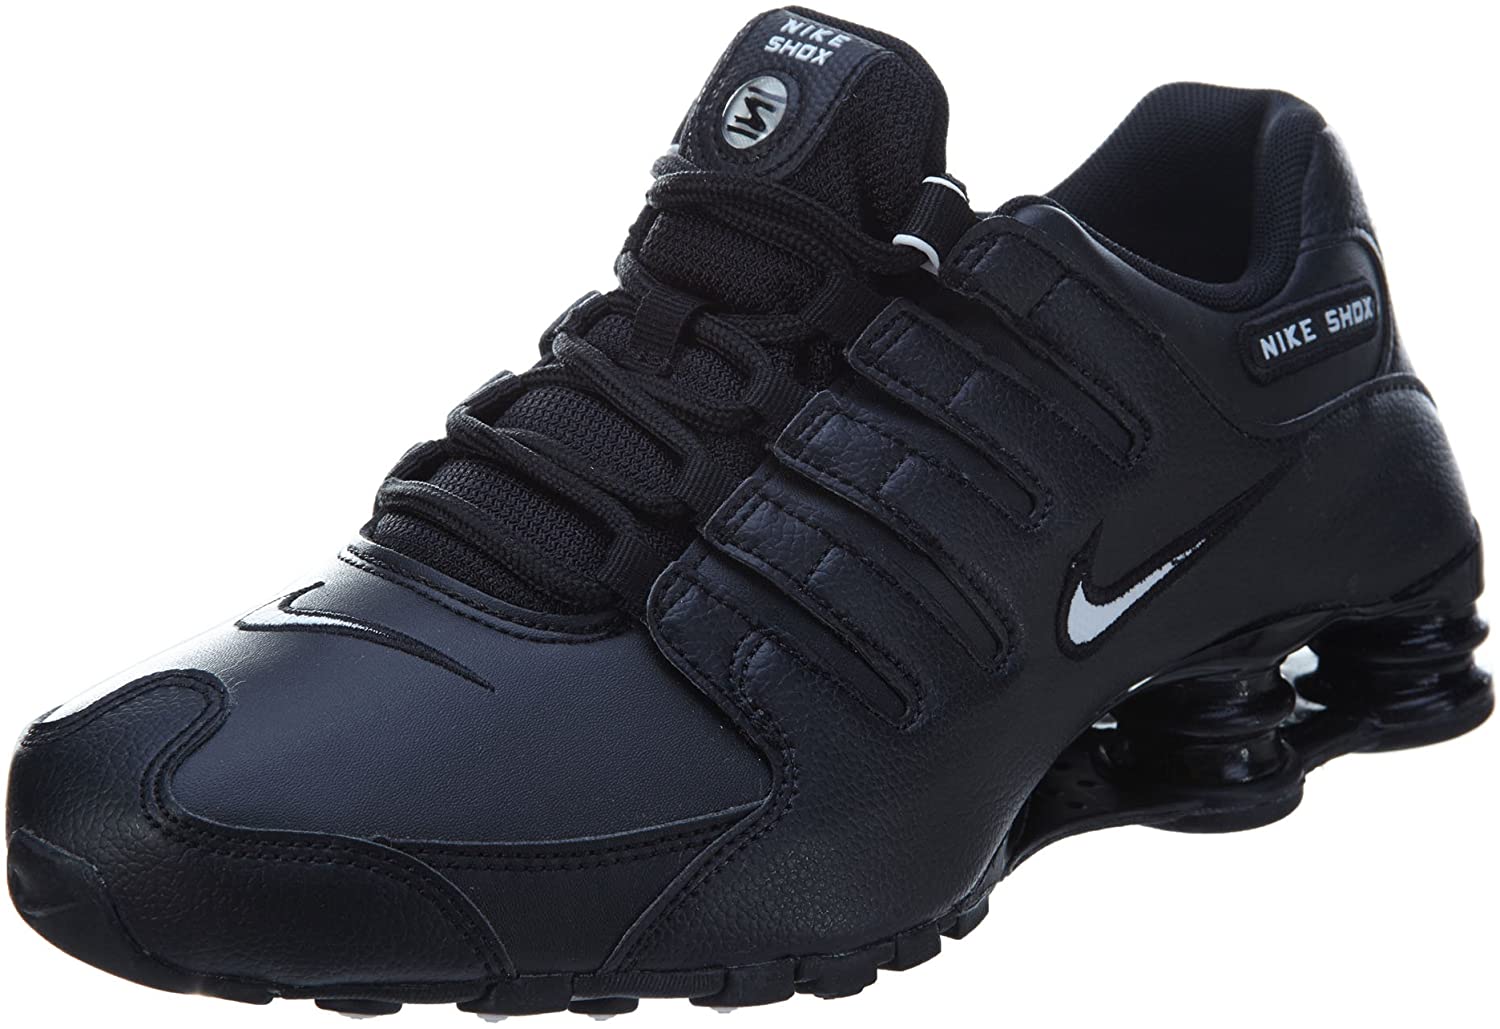 Mens Nike Shox Size 10: Review and Comparison with Other Sizes and Models